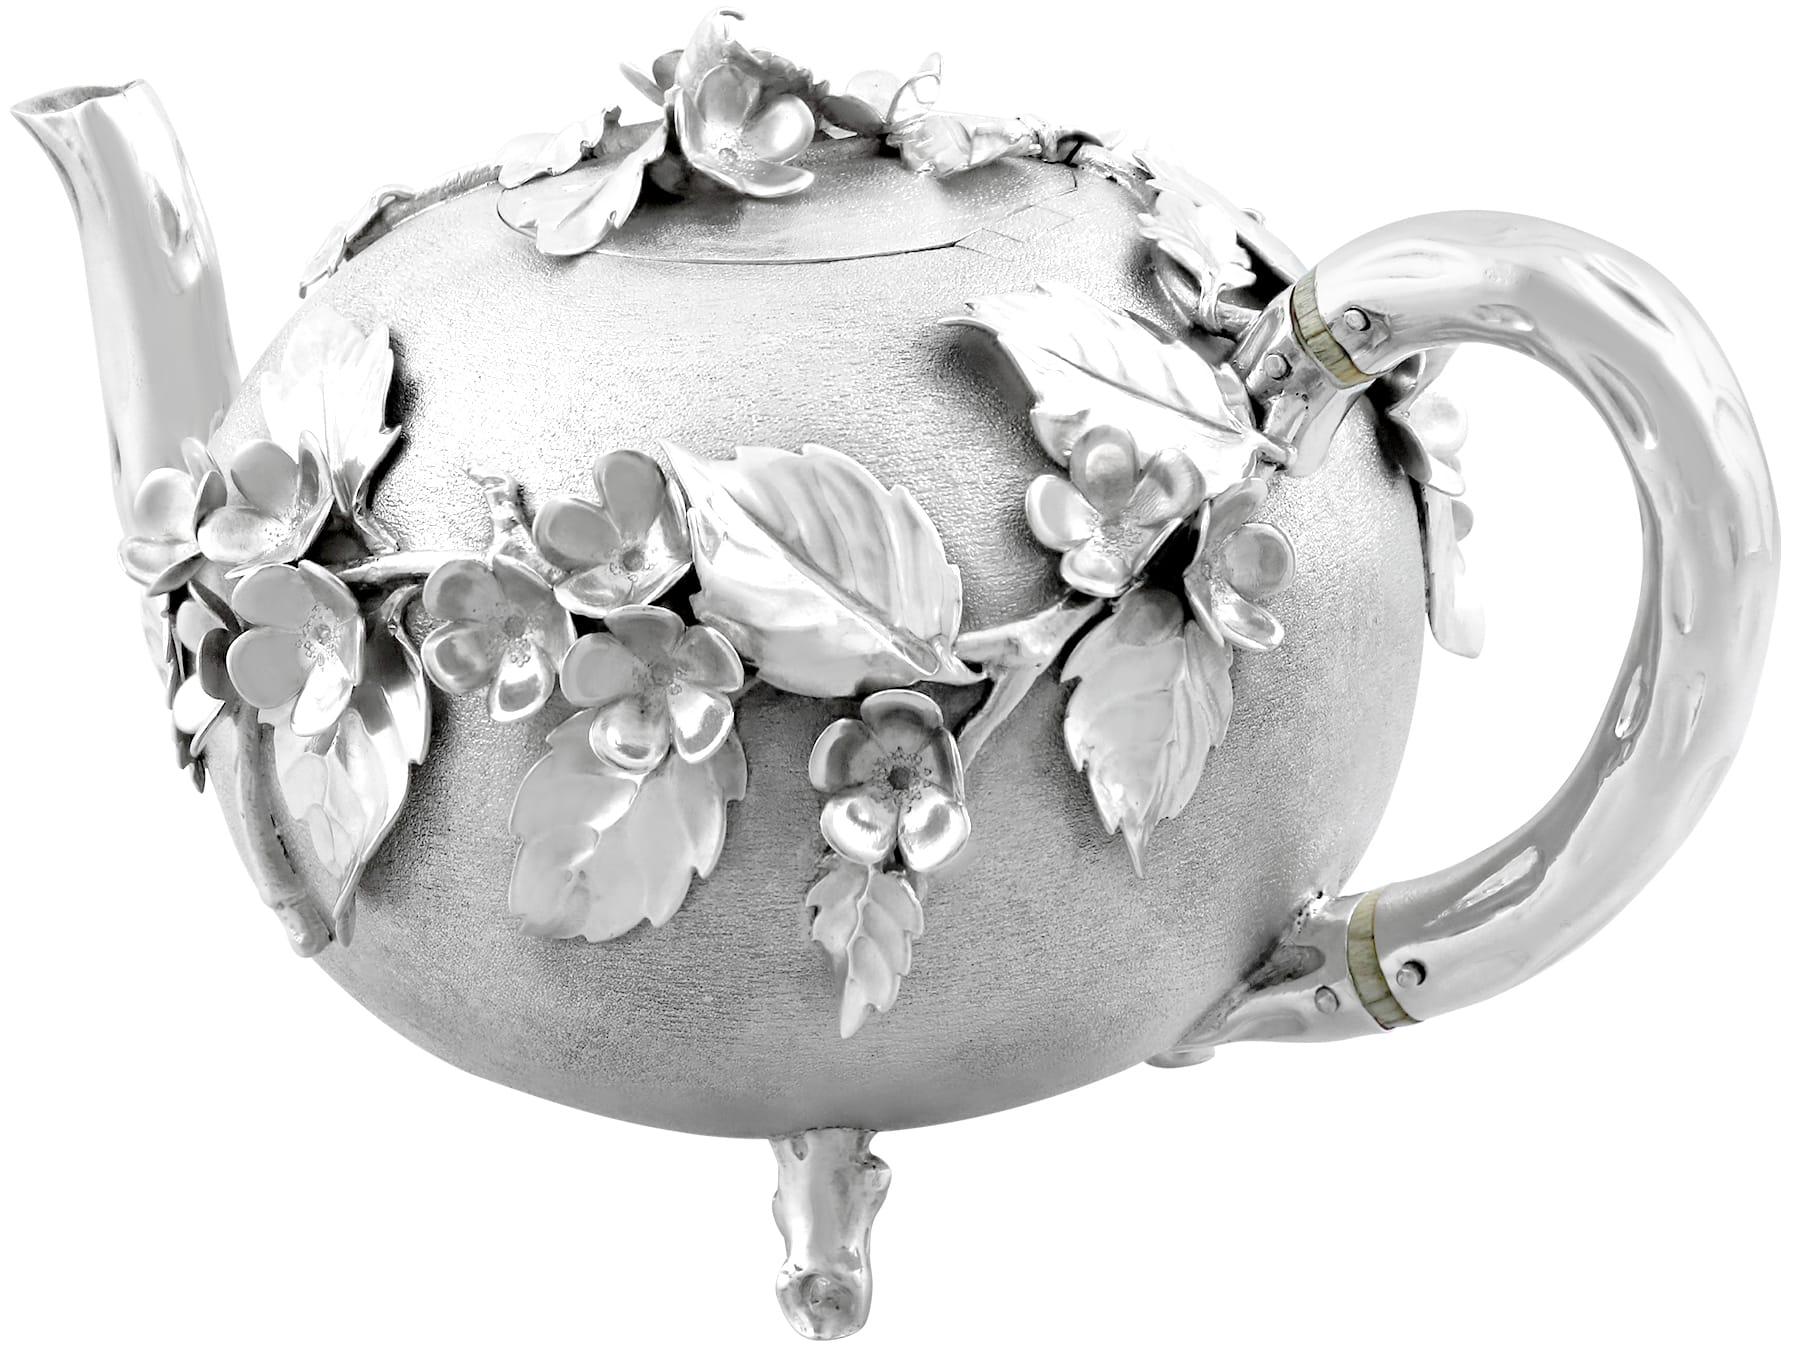 Mid-19th Century 1800s Antique William IV Sterling Silver Teapot by Charles Fox II 